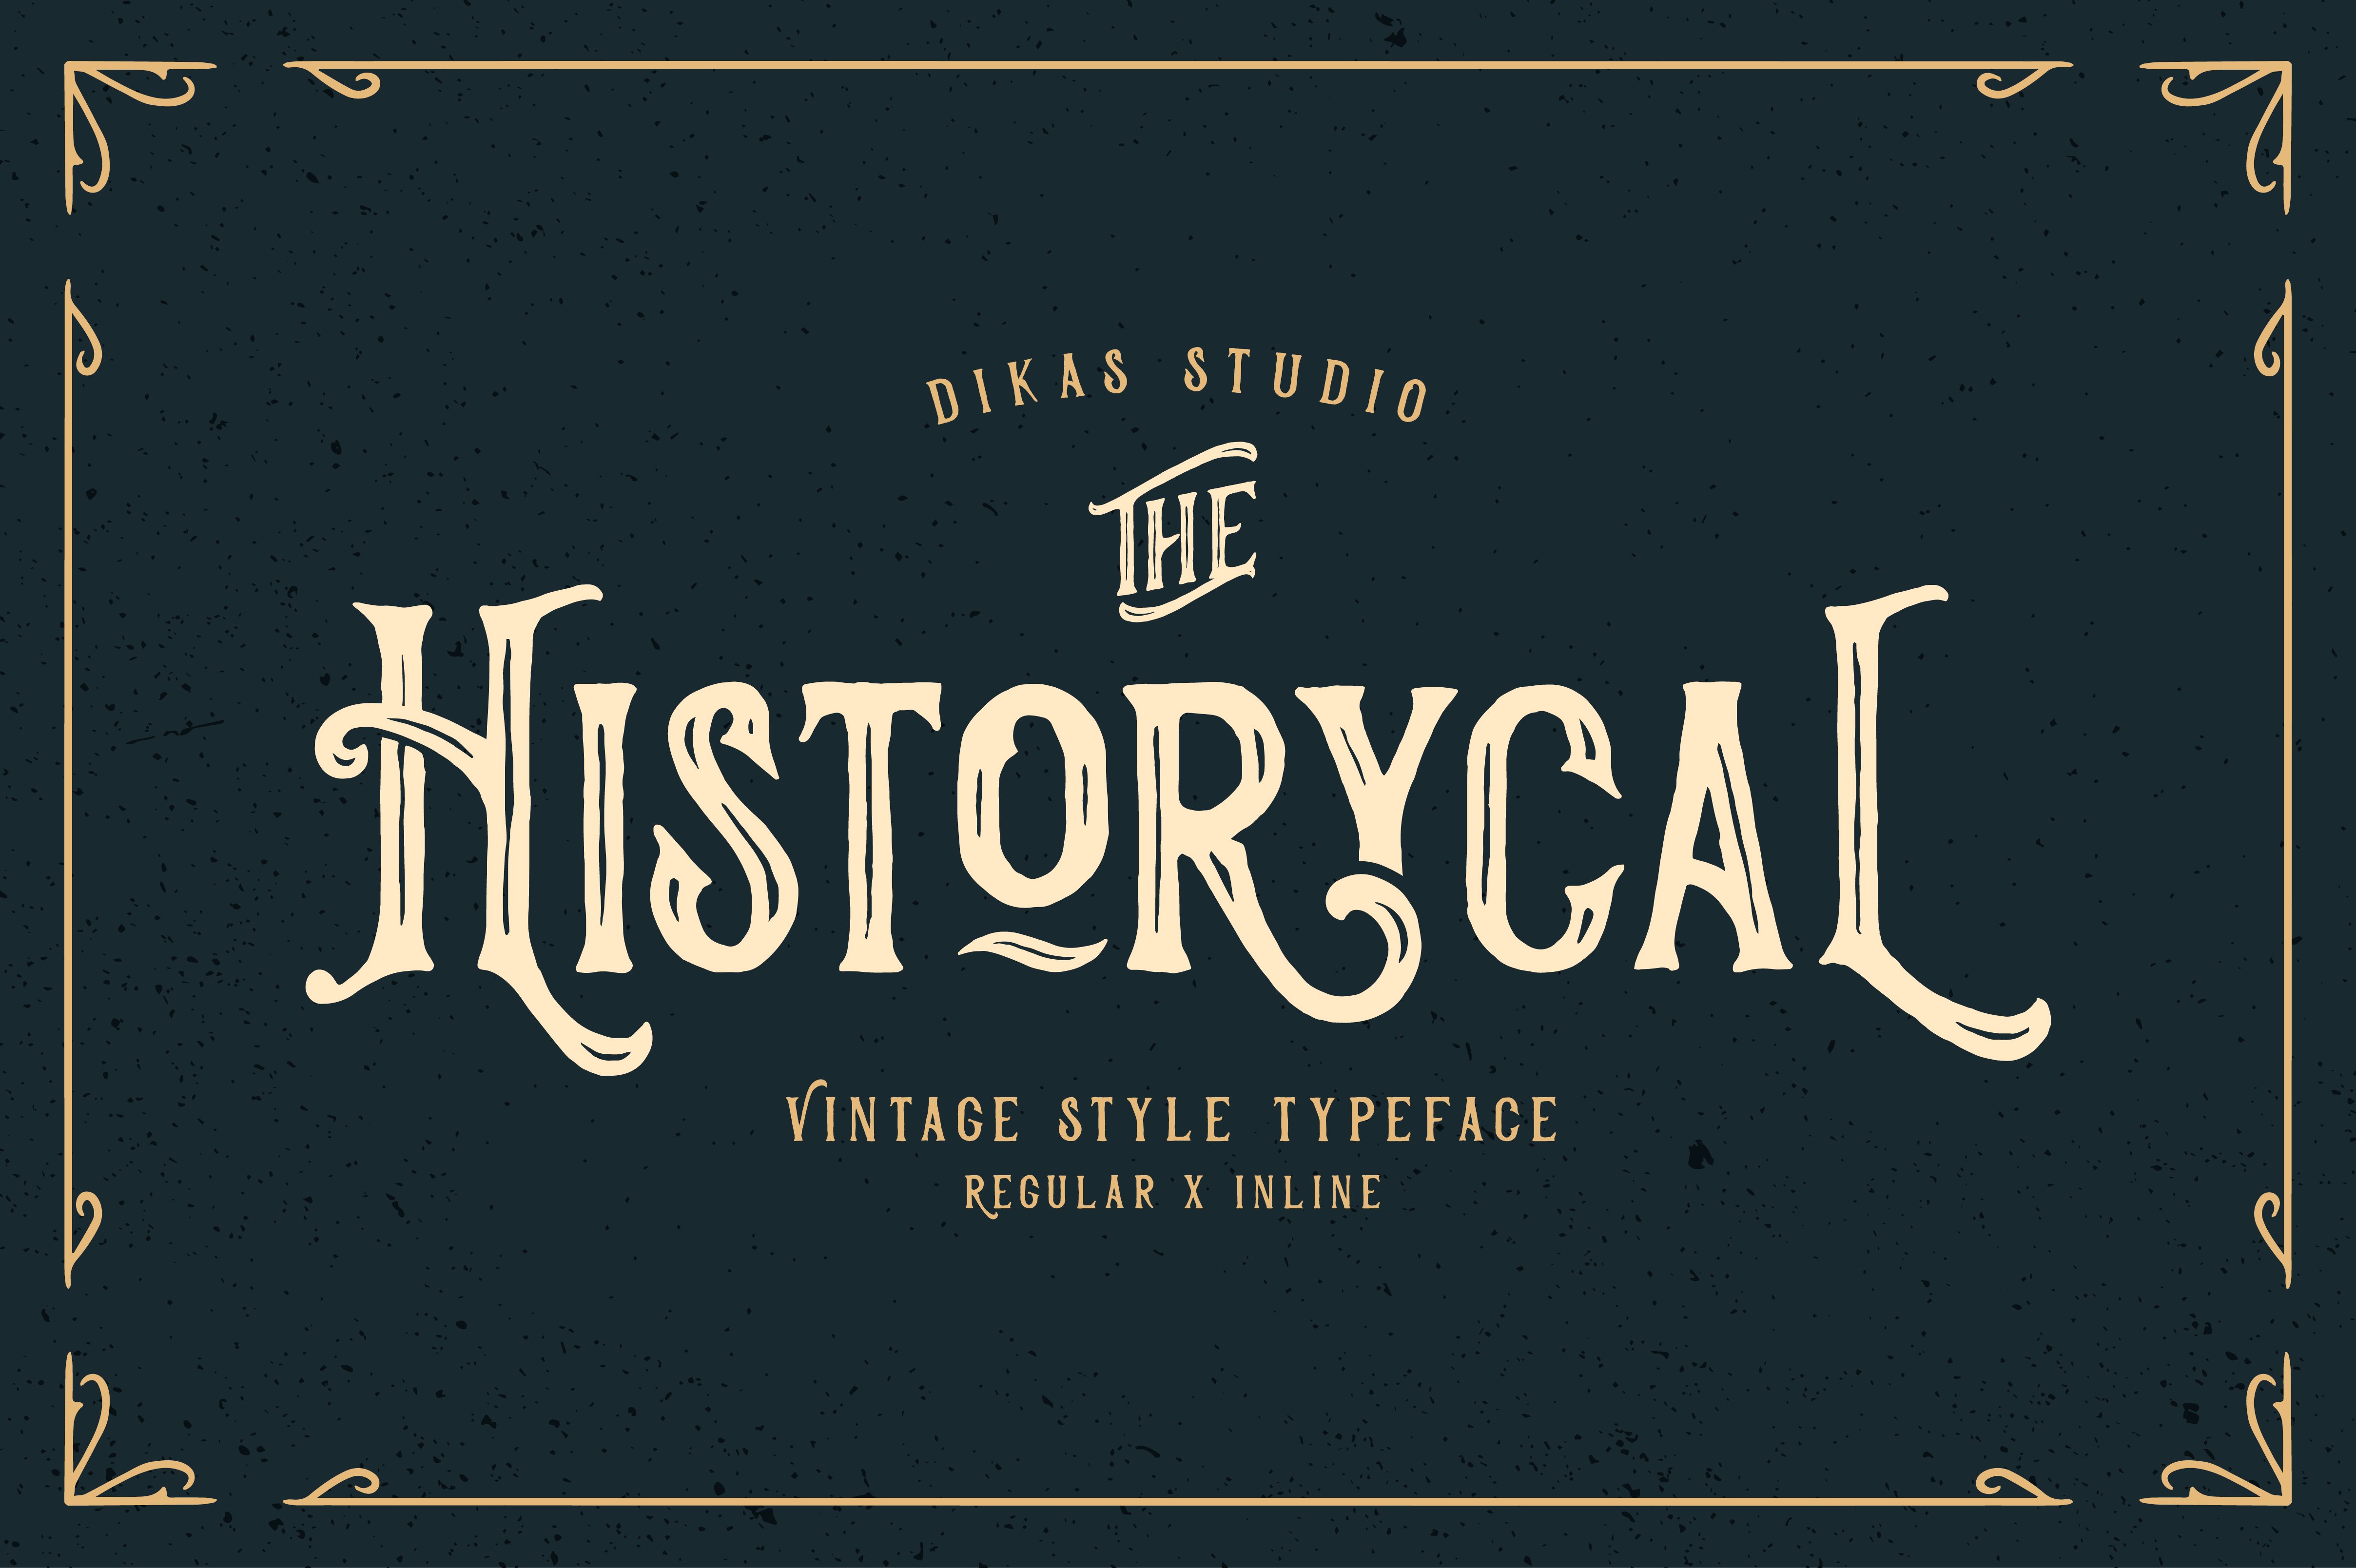 Historycal - 2 Font Styles cover image.